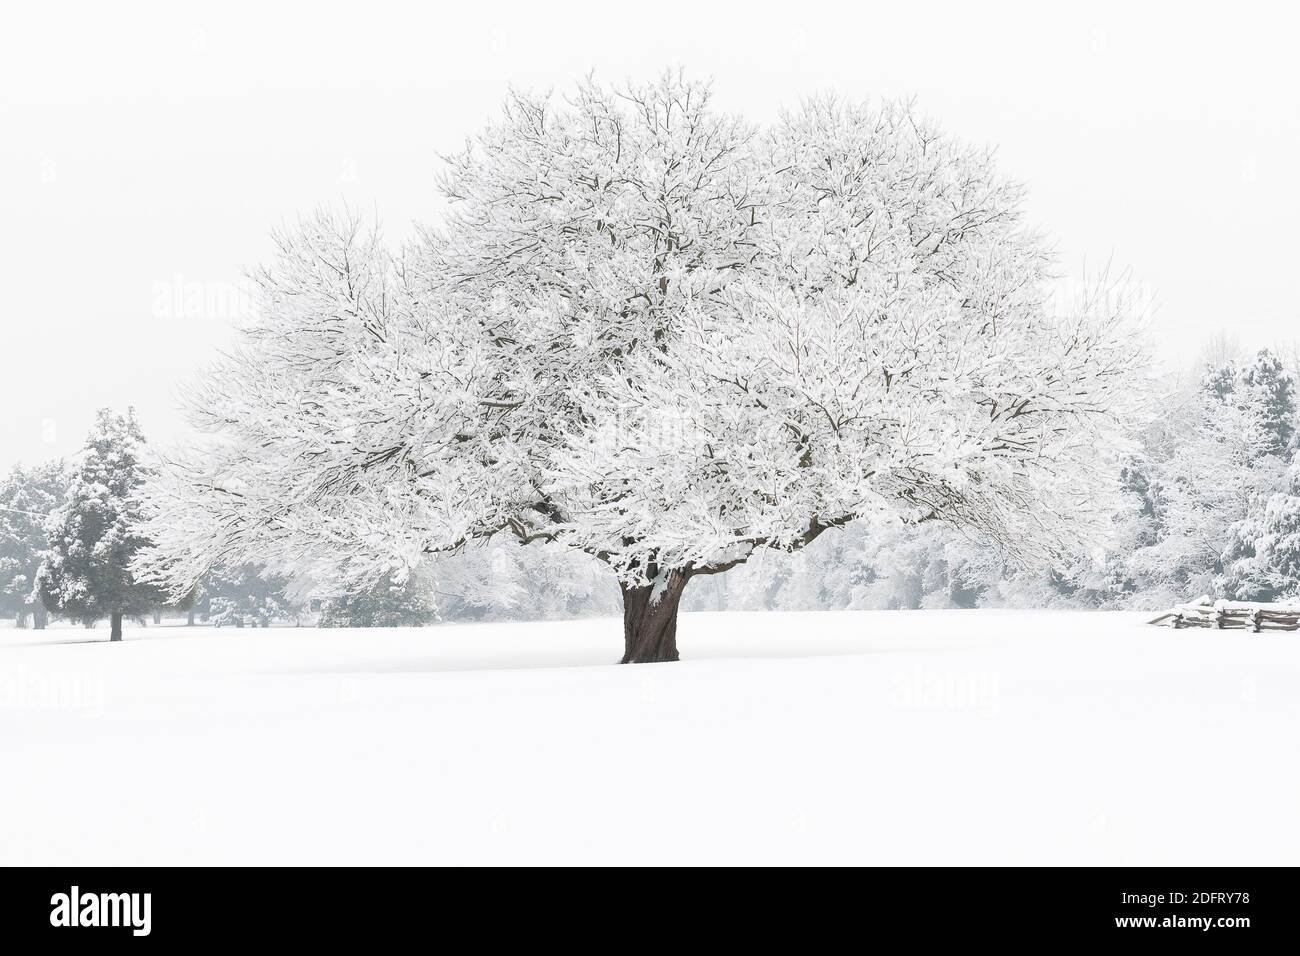 Snow blankets a tree in winter. Stock Photo